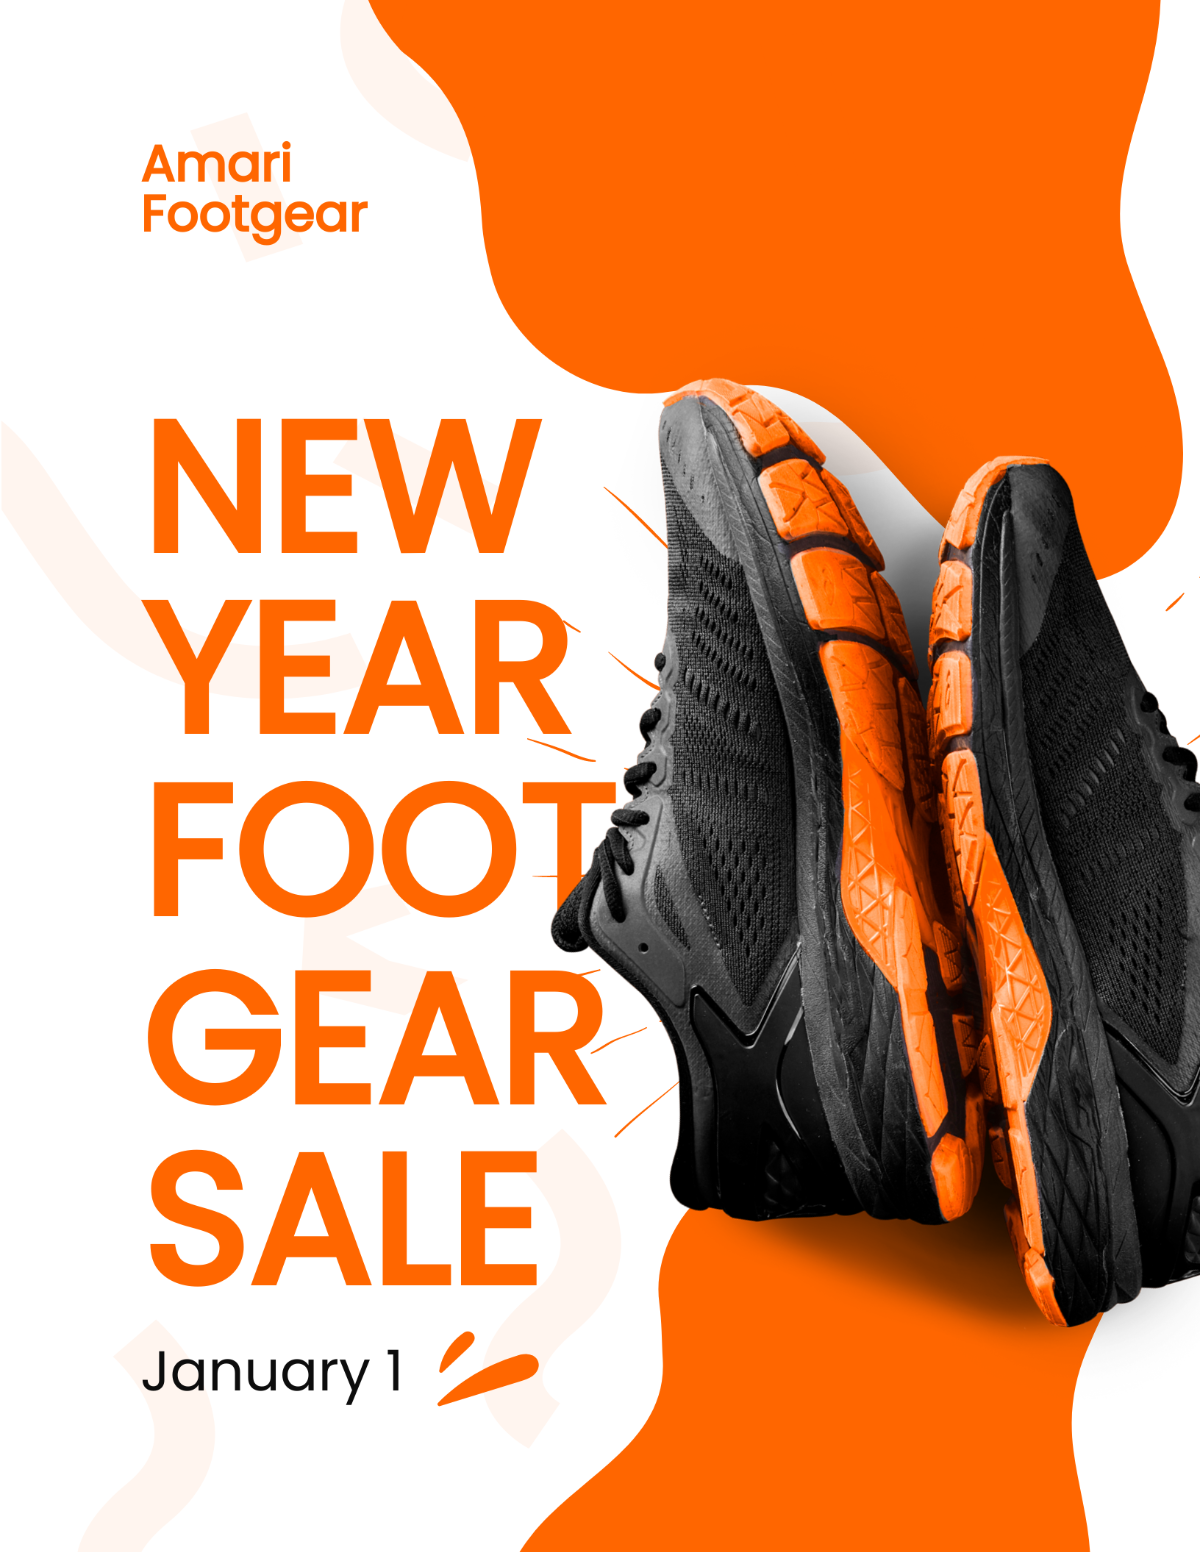 New Year Product Sale Promotion Flyer Template